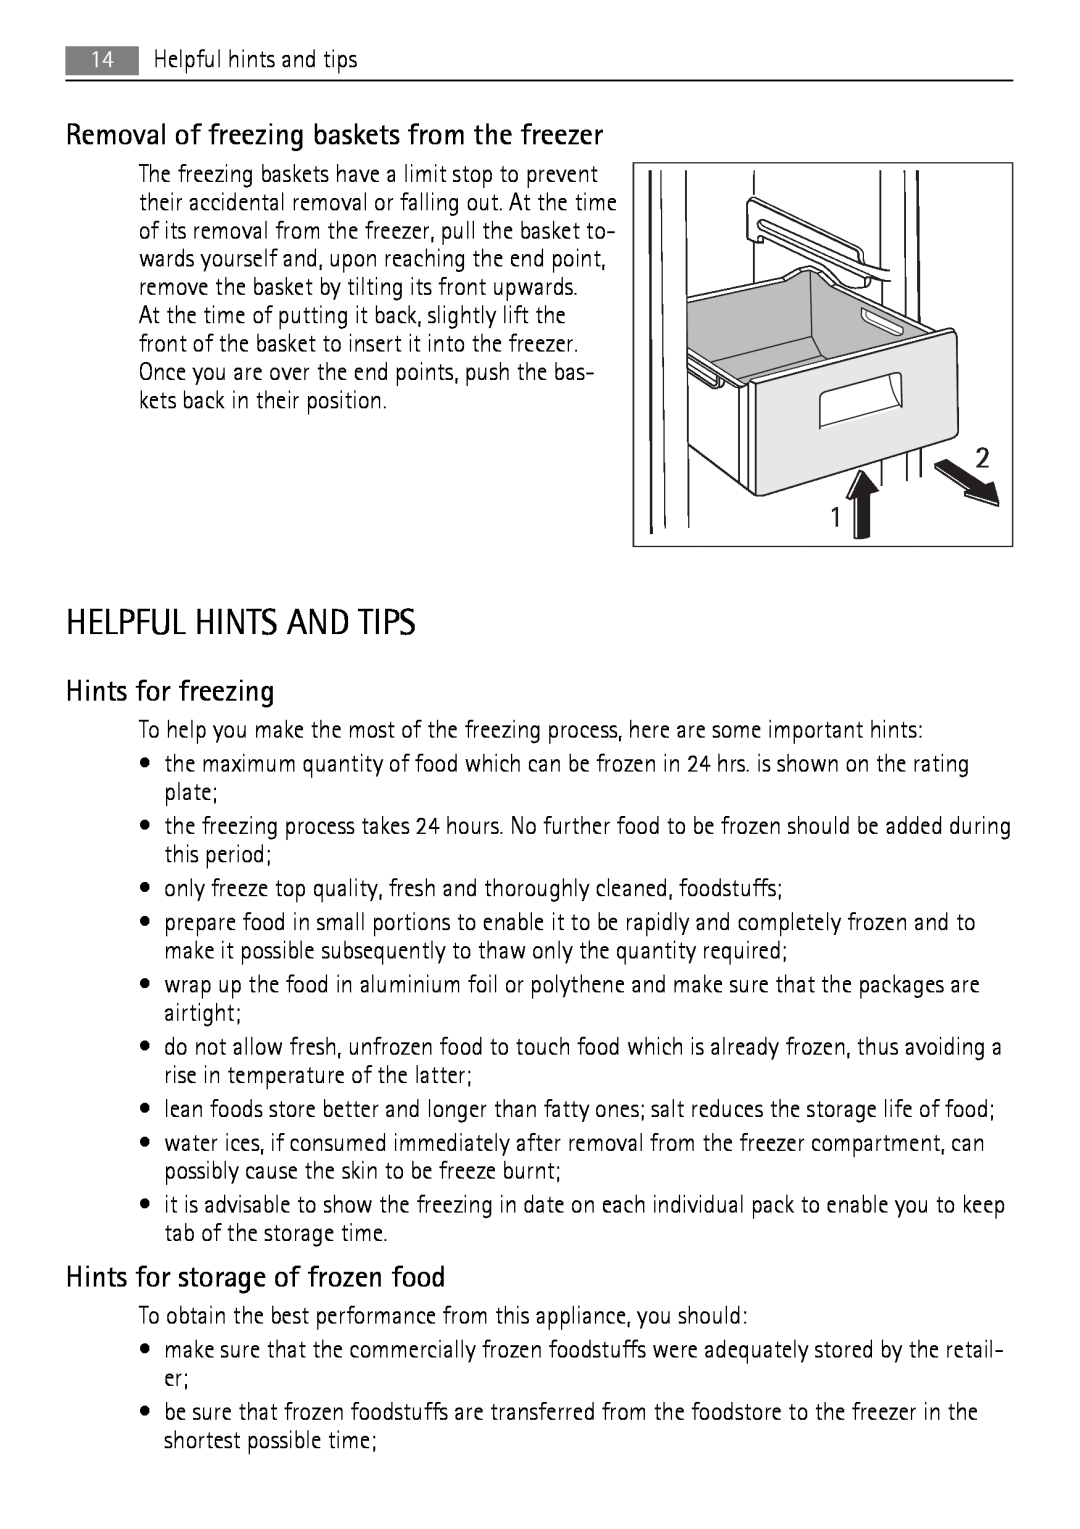 AEG A92860GNX0 user manual Helpful Hints And Tips, Hints for freezing, Hints for storage of frozen food 